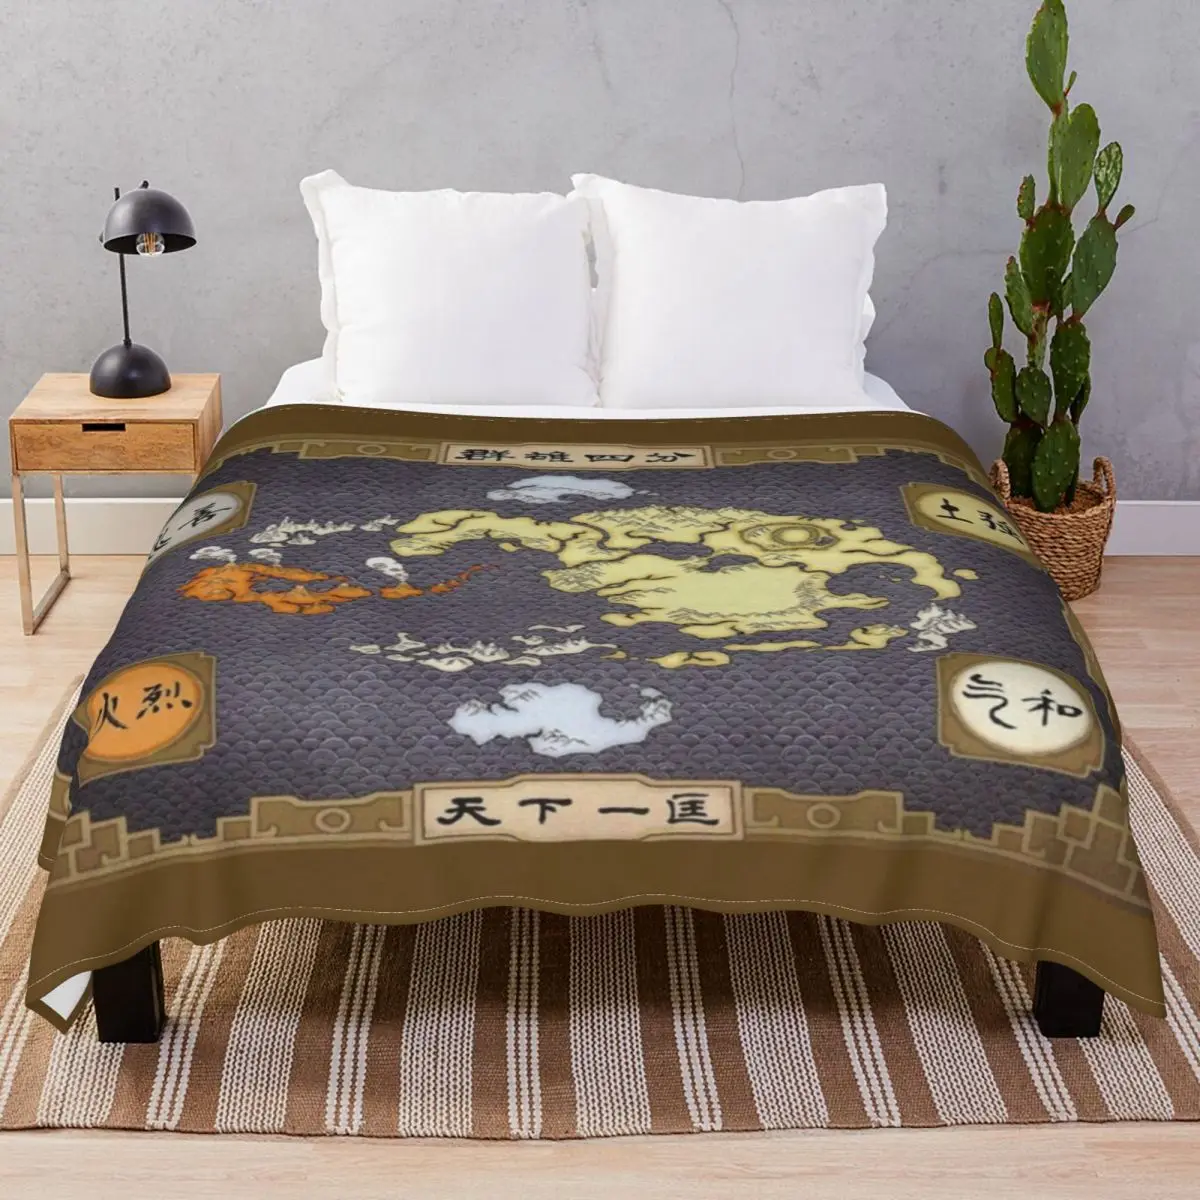 Avatar The Last Airbender Map Blankets Fleece Textile Decor Lightweight Thin Throw Blanket for Bed Sofa Camp Office